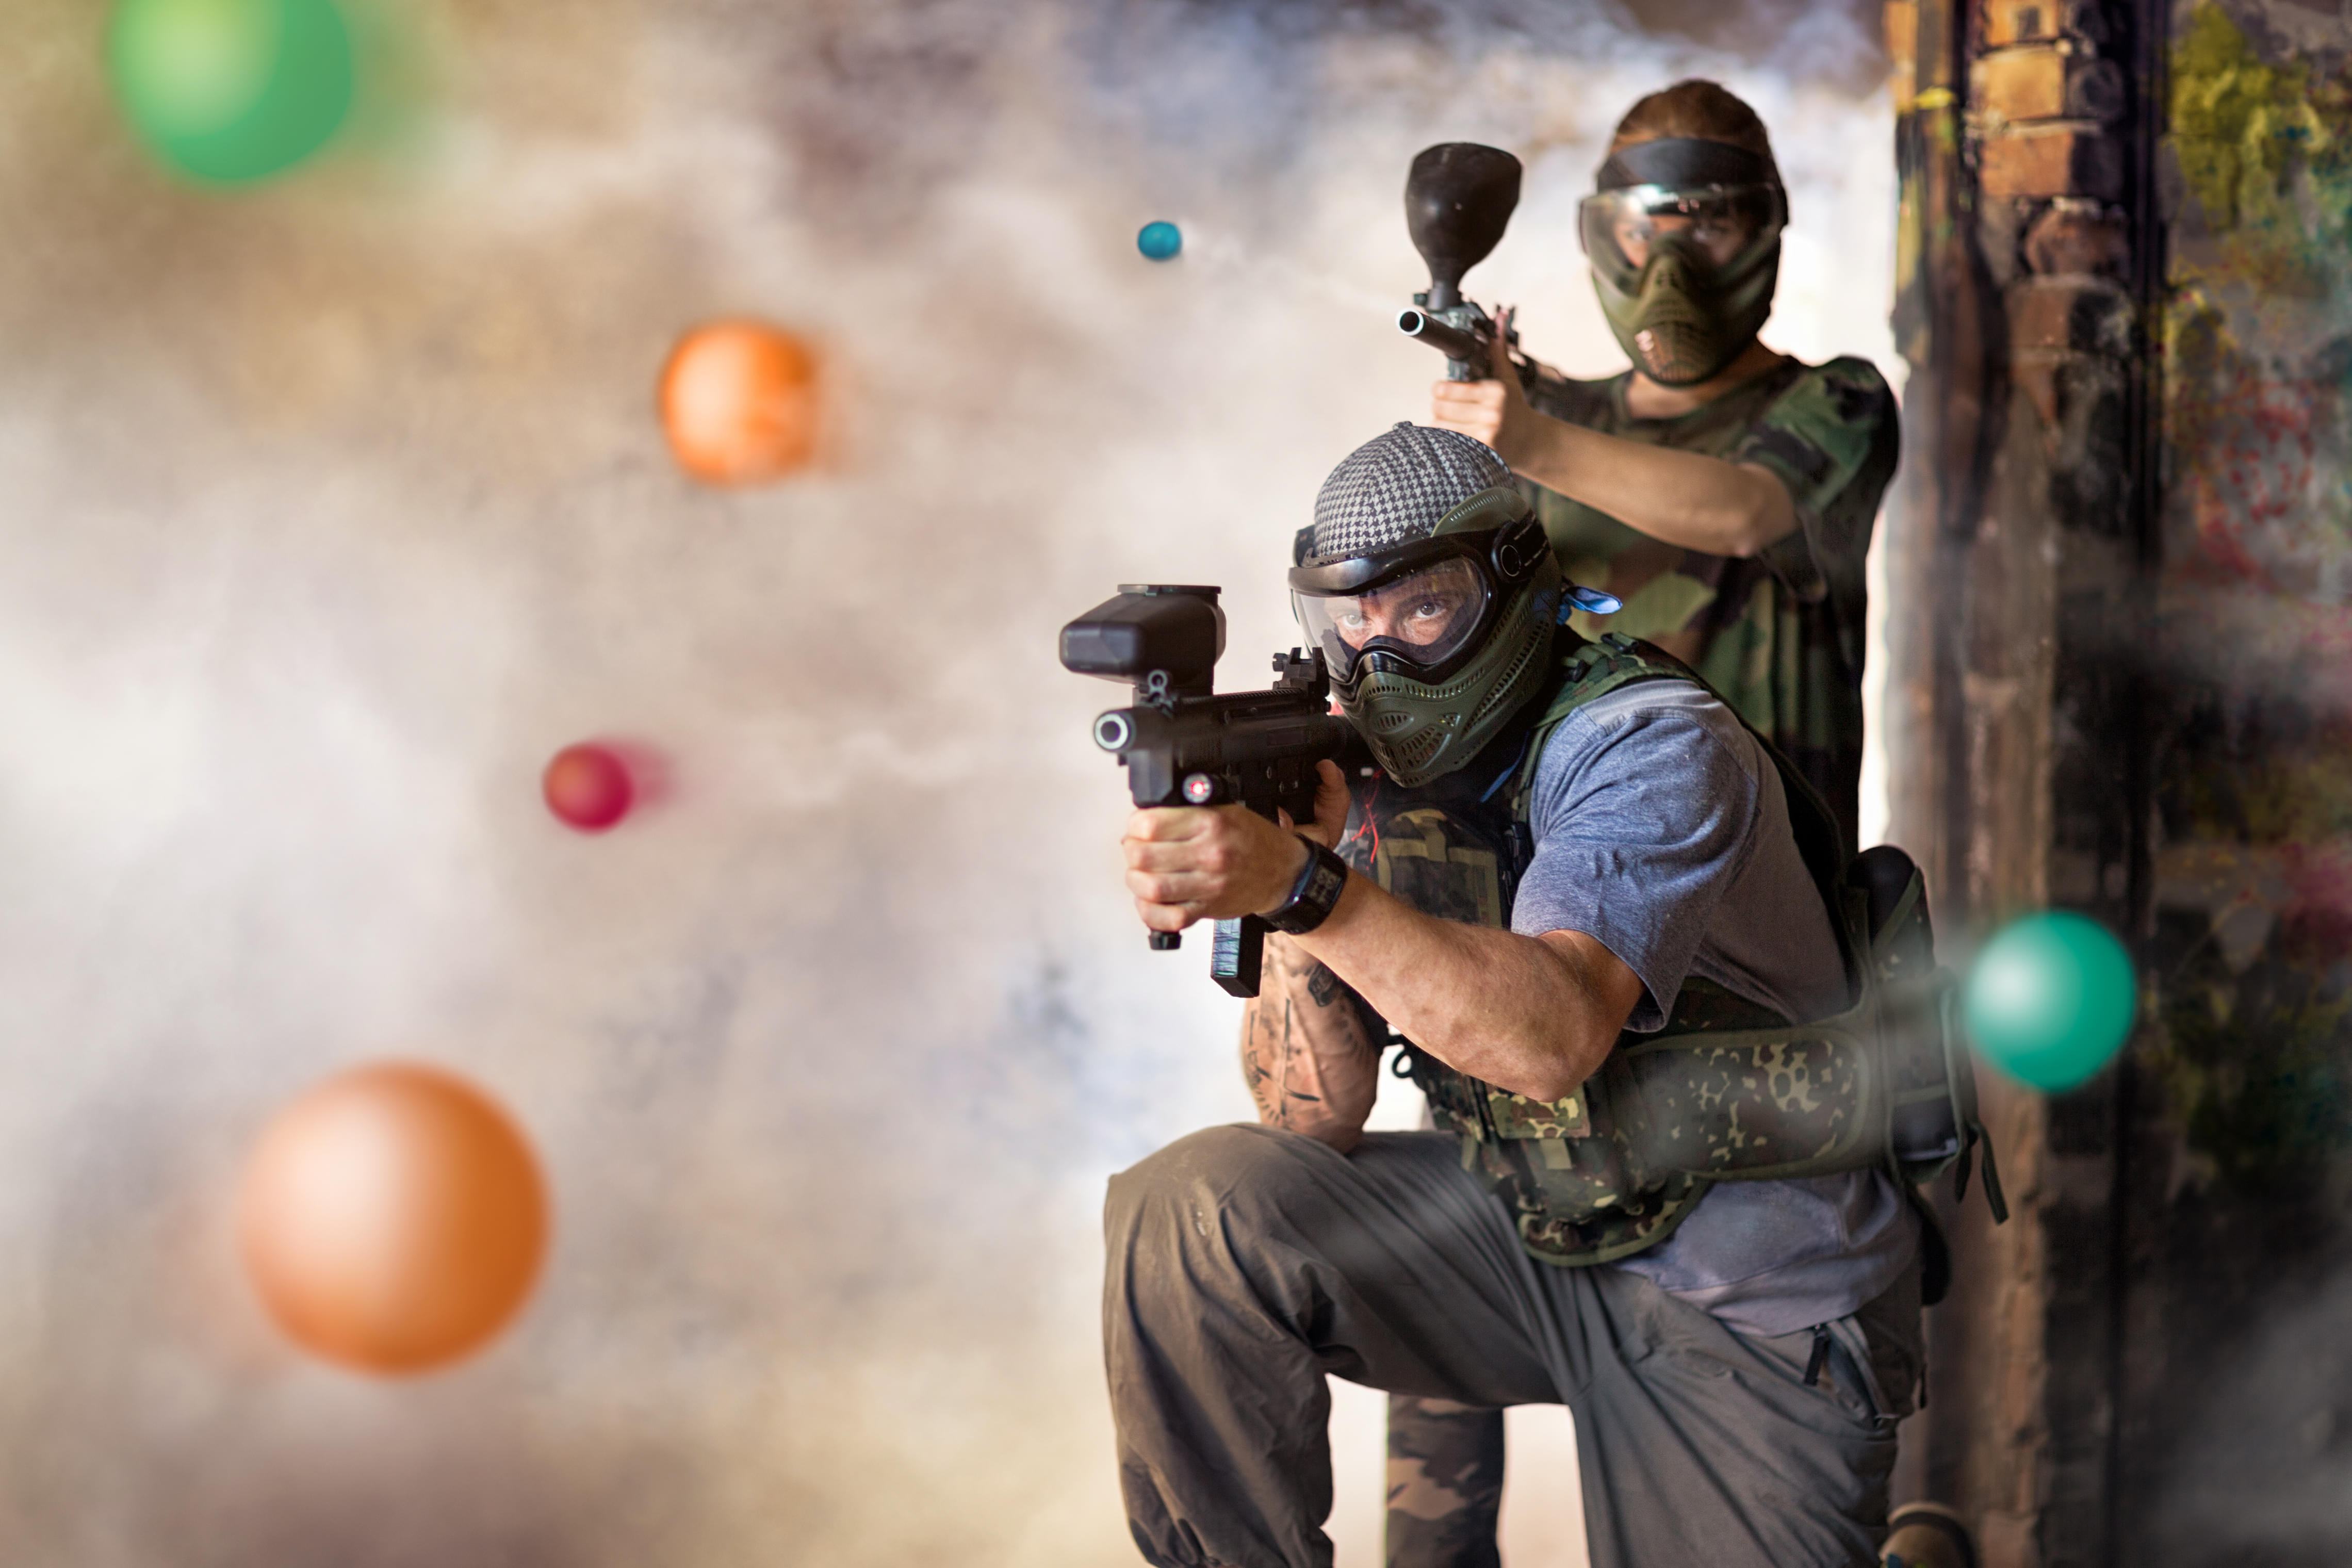 Indulge in a game of Paintball in Pattaya